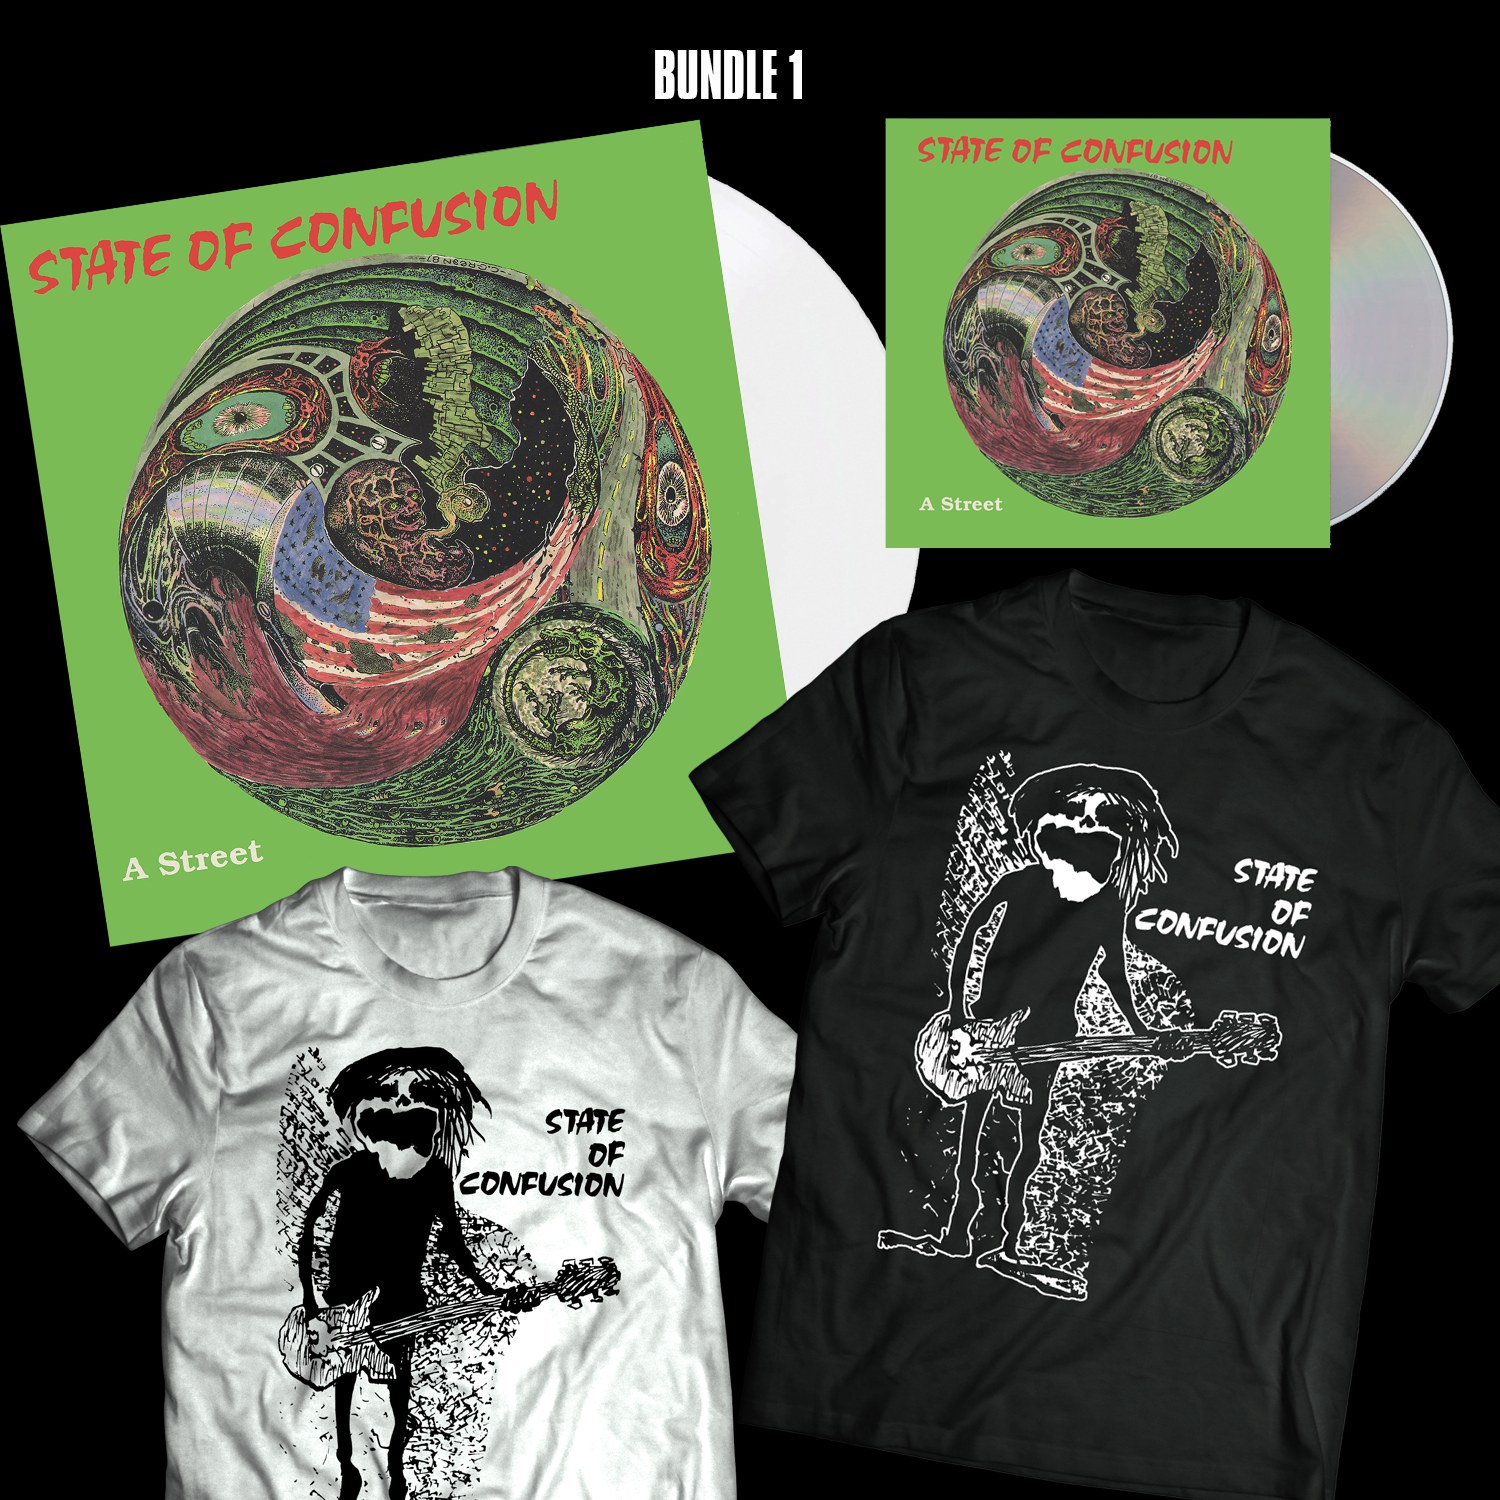 STATE OF CONFUSION "A STREET" REMASTERED BUNDLE 1 ** PRE ORDER **